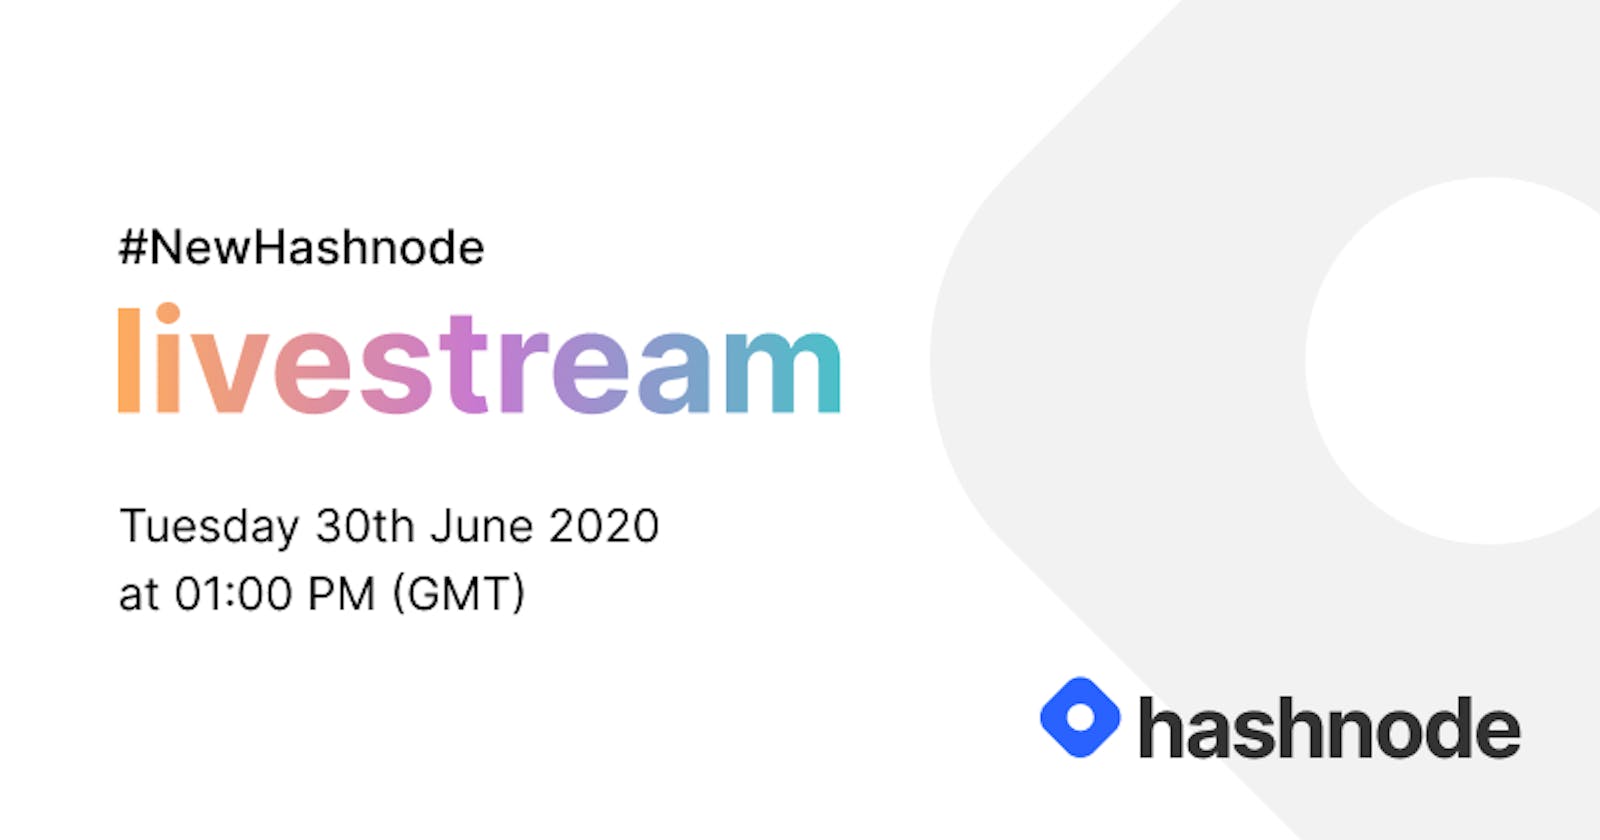 Announcing the #NewHashnode Live Stream